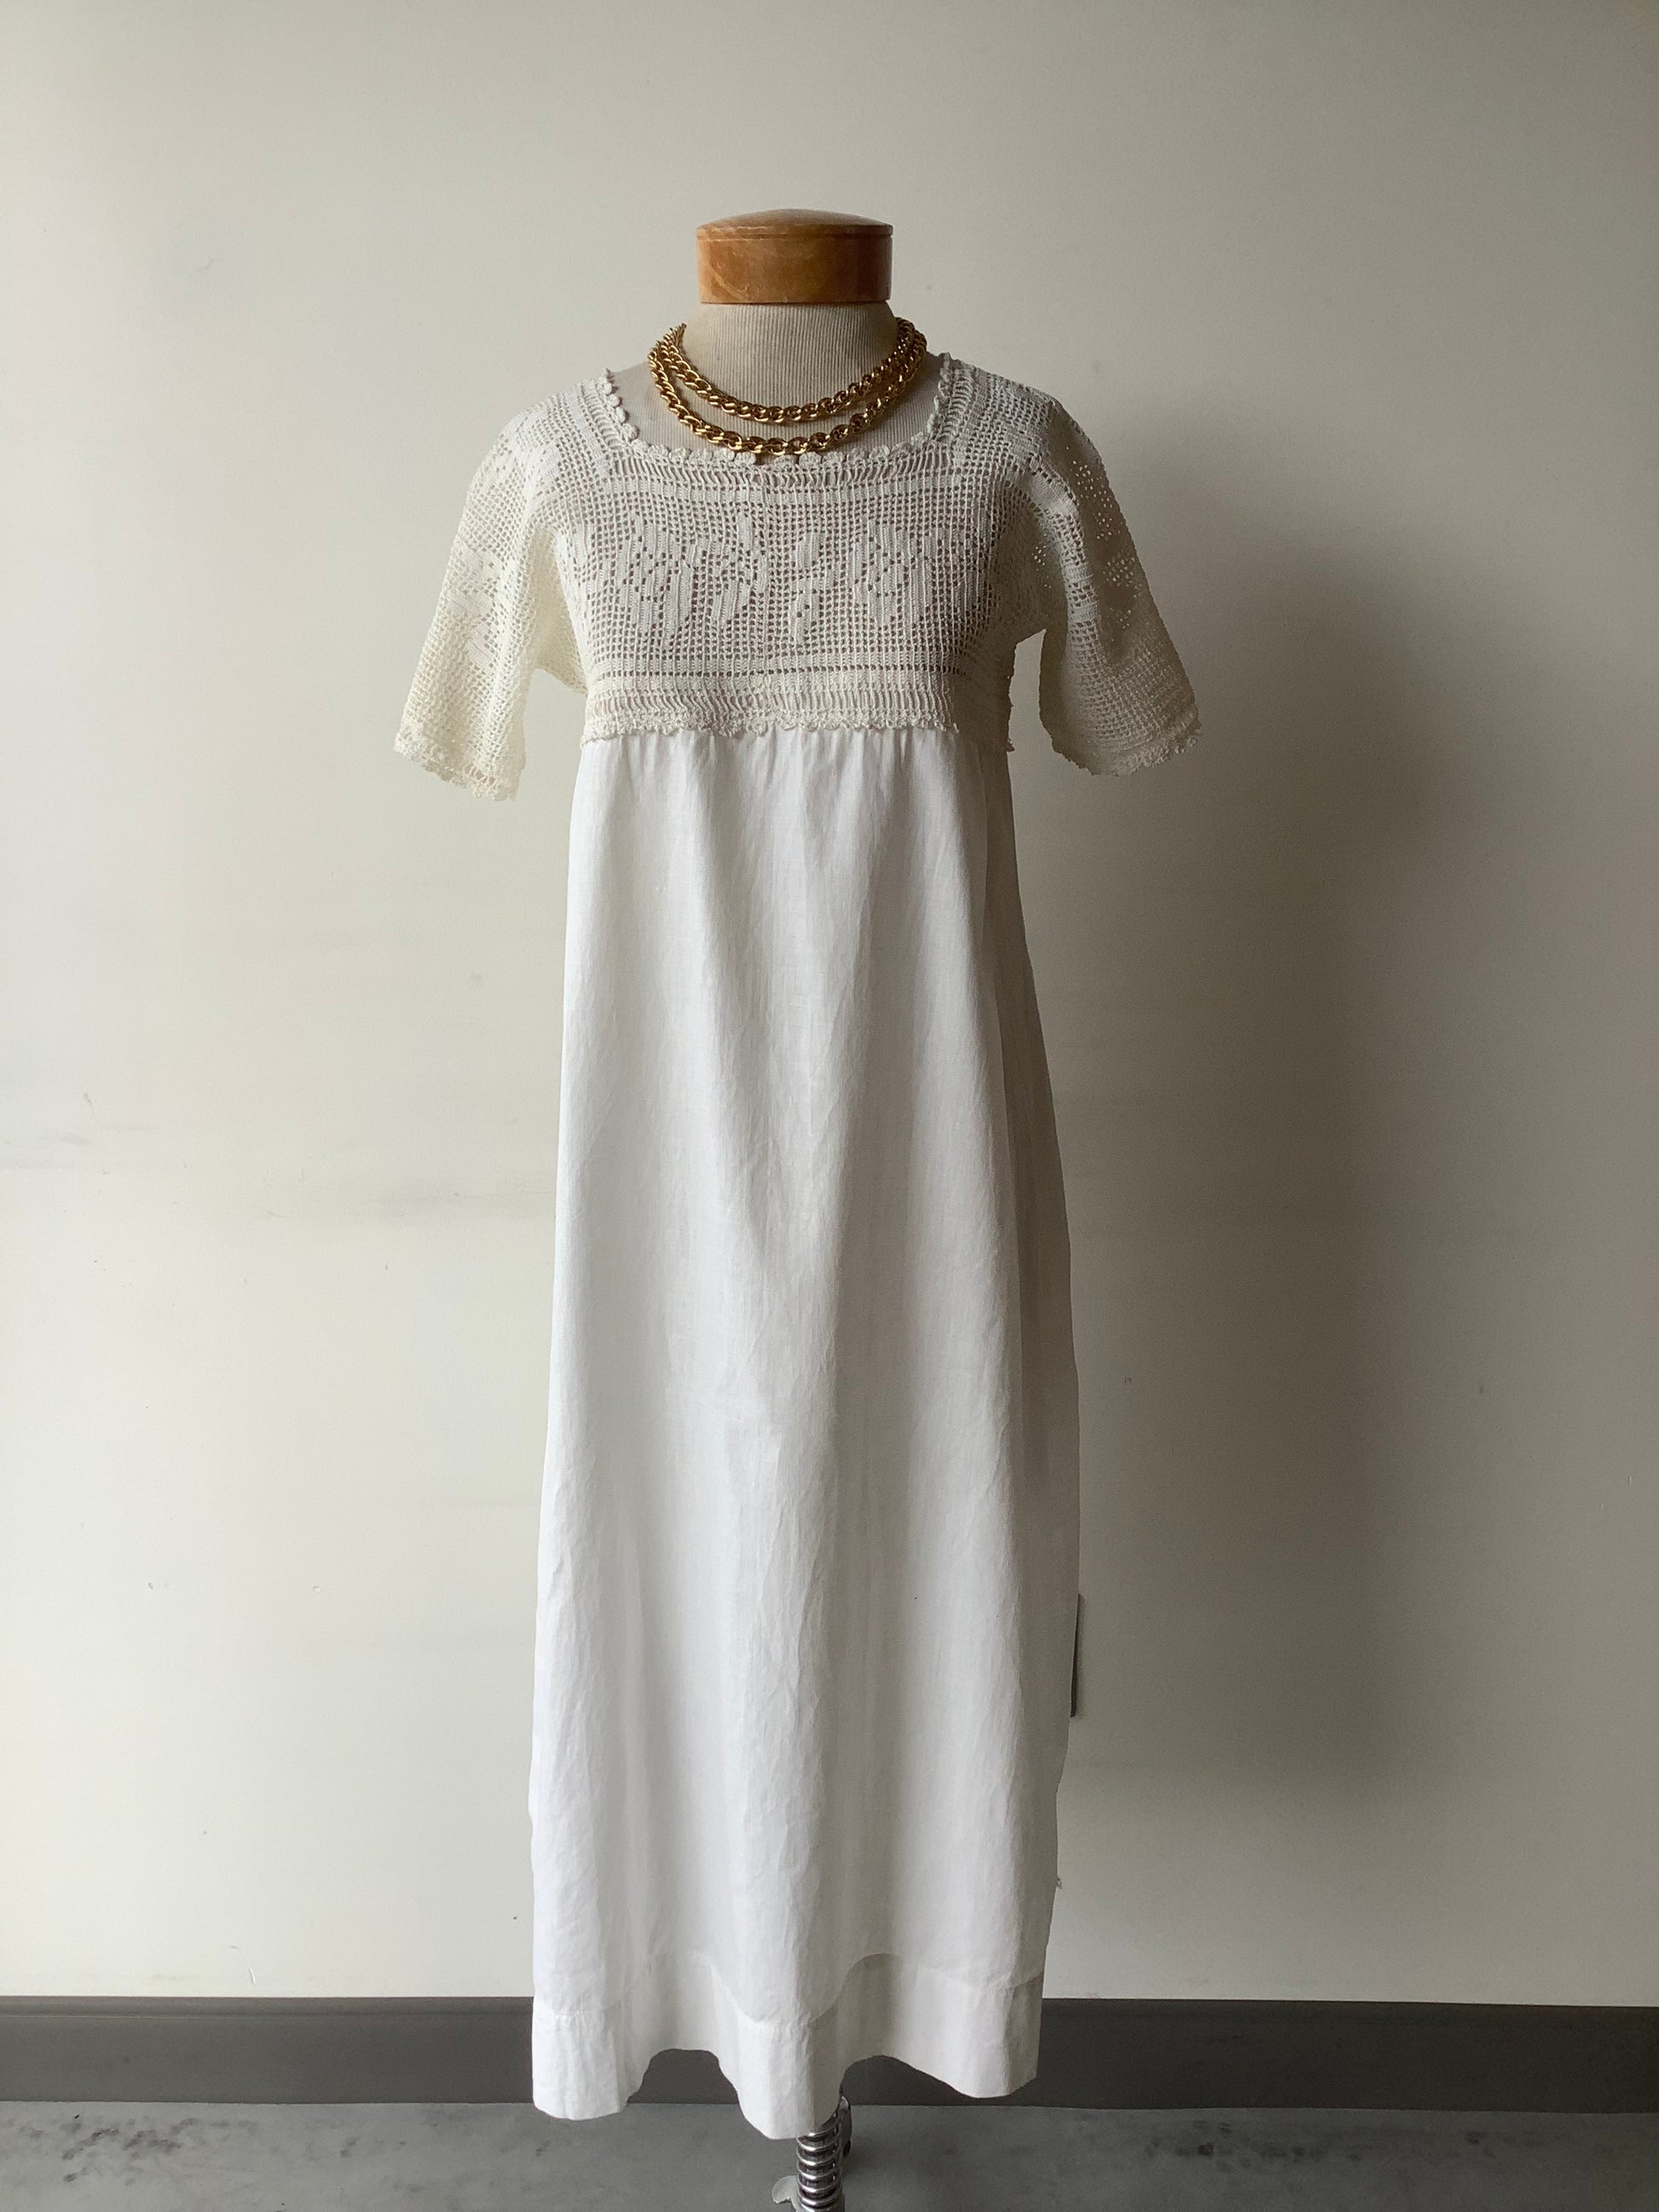 SALE Vintage Antique 1890's White Cotton Nightgown, Nightie With Eyelets  and Crochet 